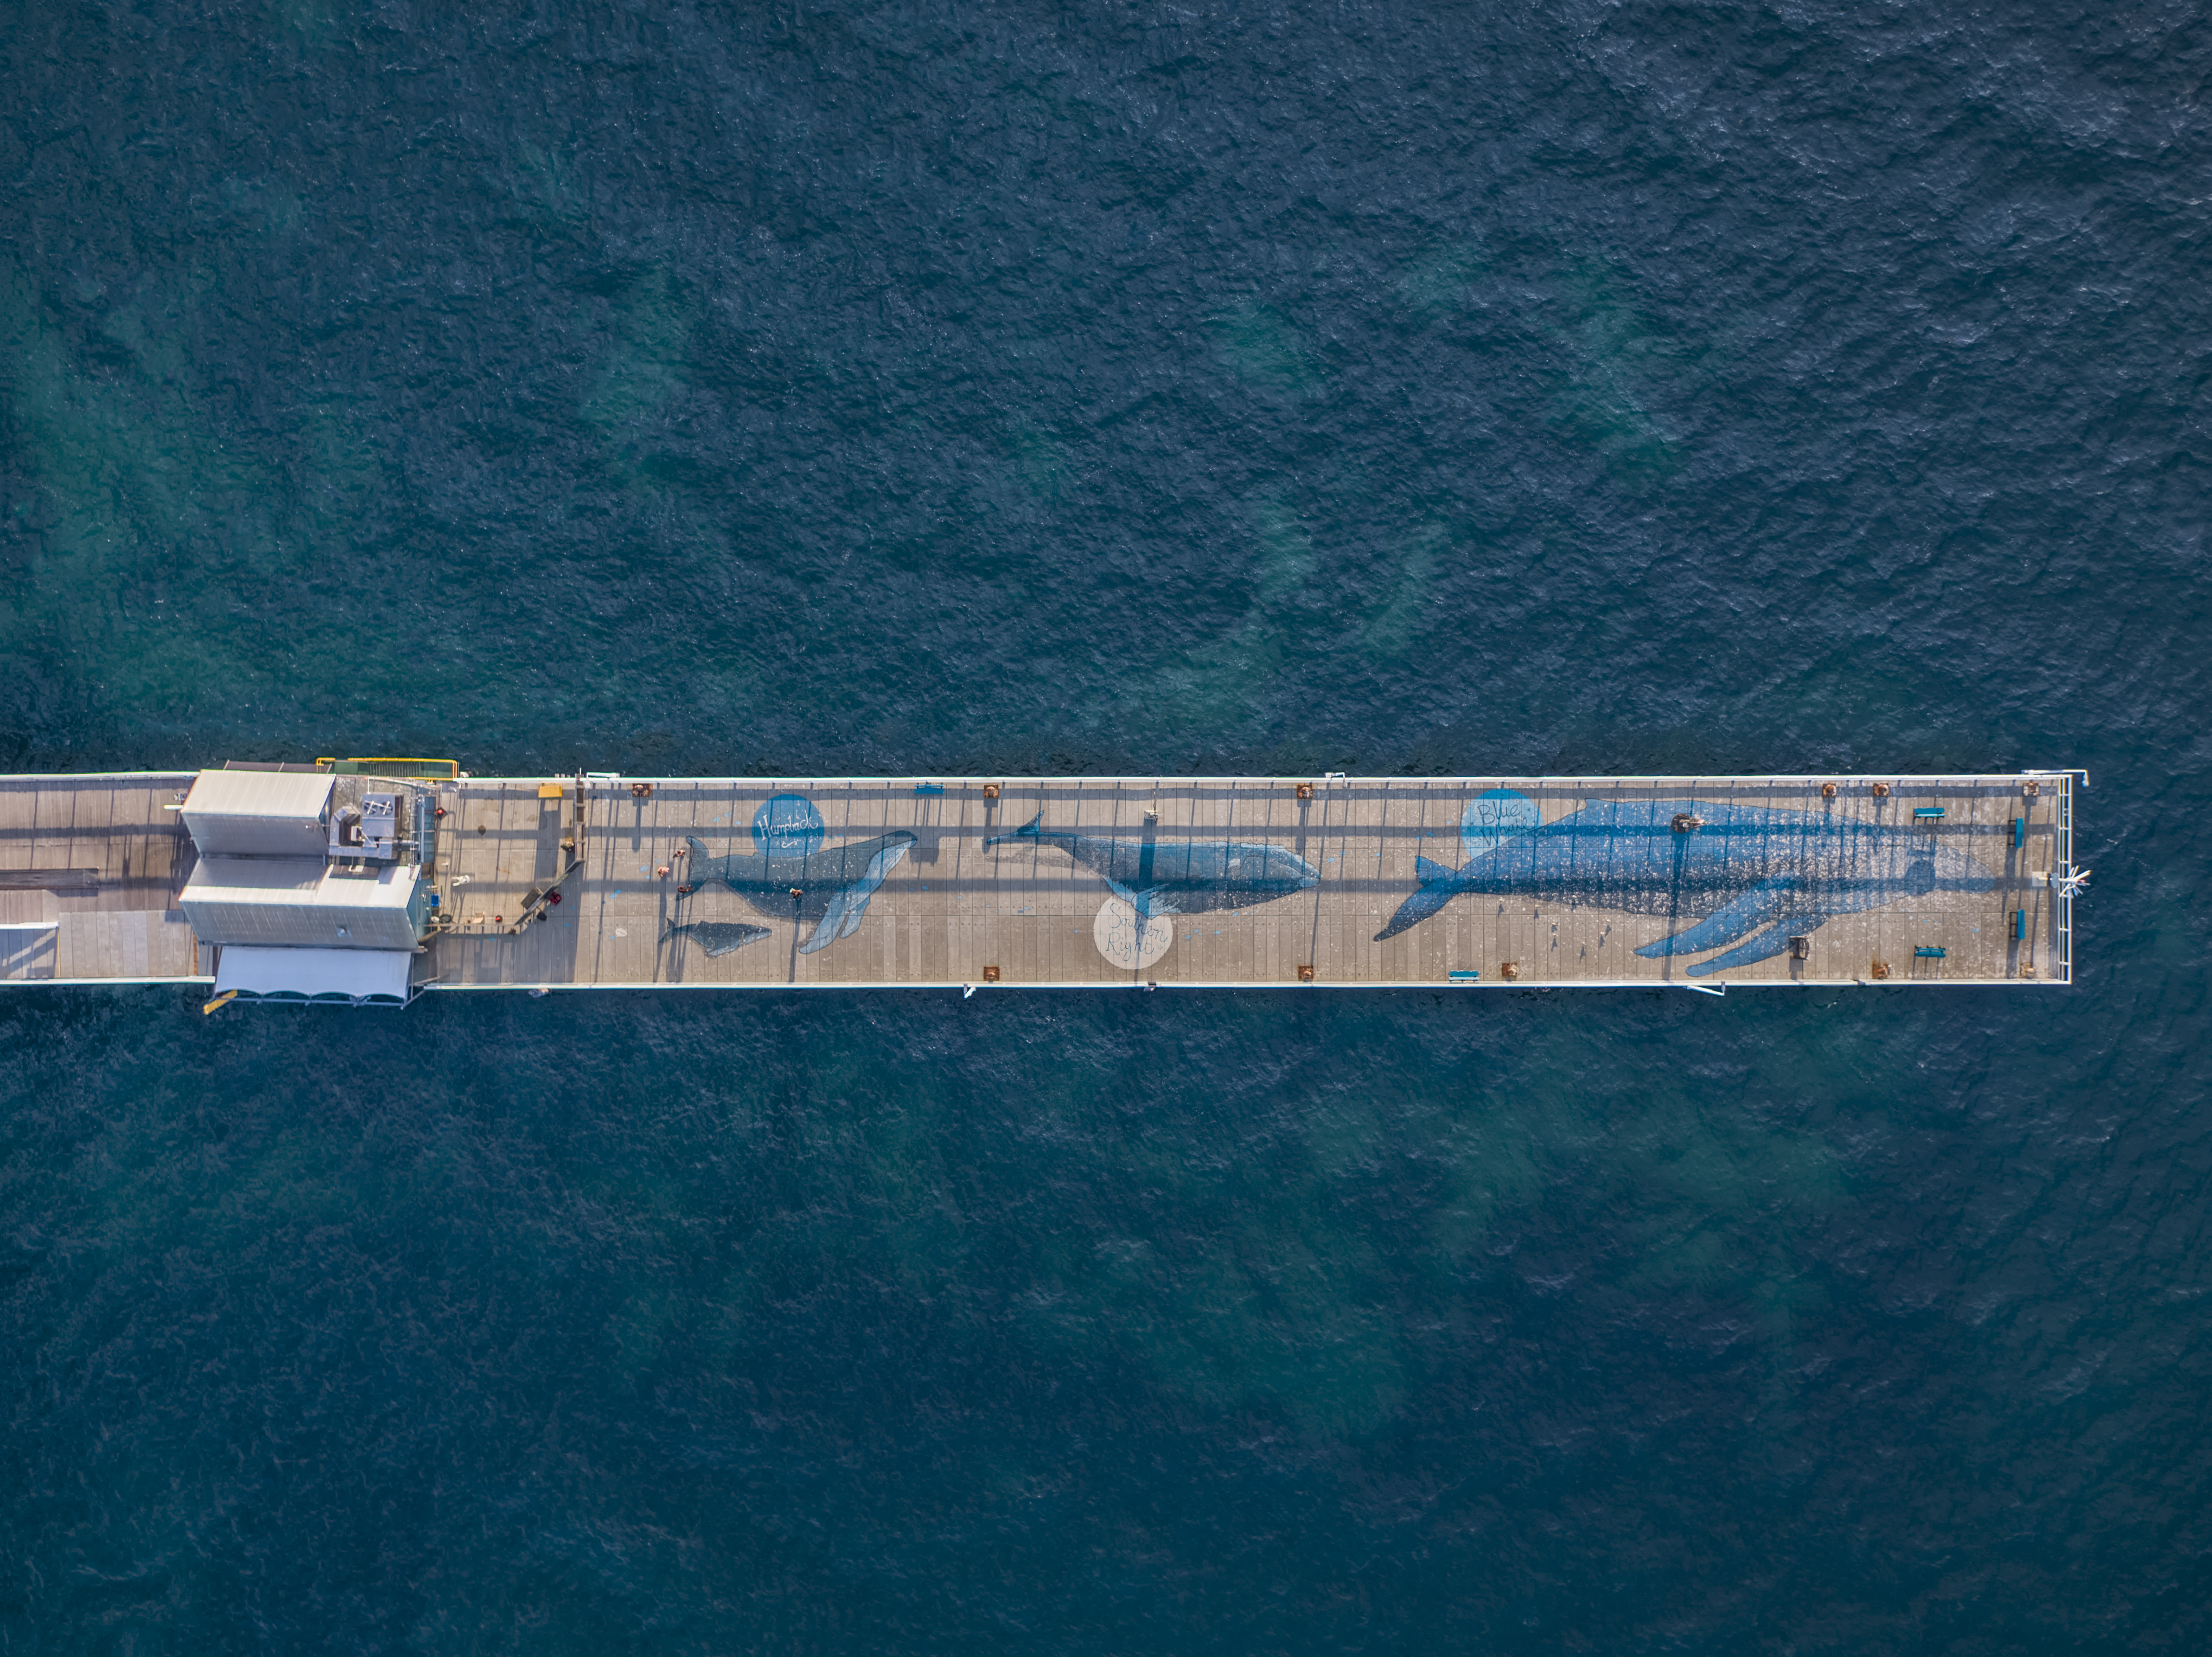 All 3 whale murals at the end of the Jetty taken from a birds-eye-view.